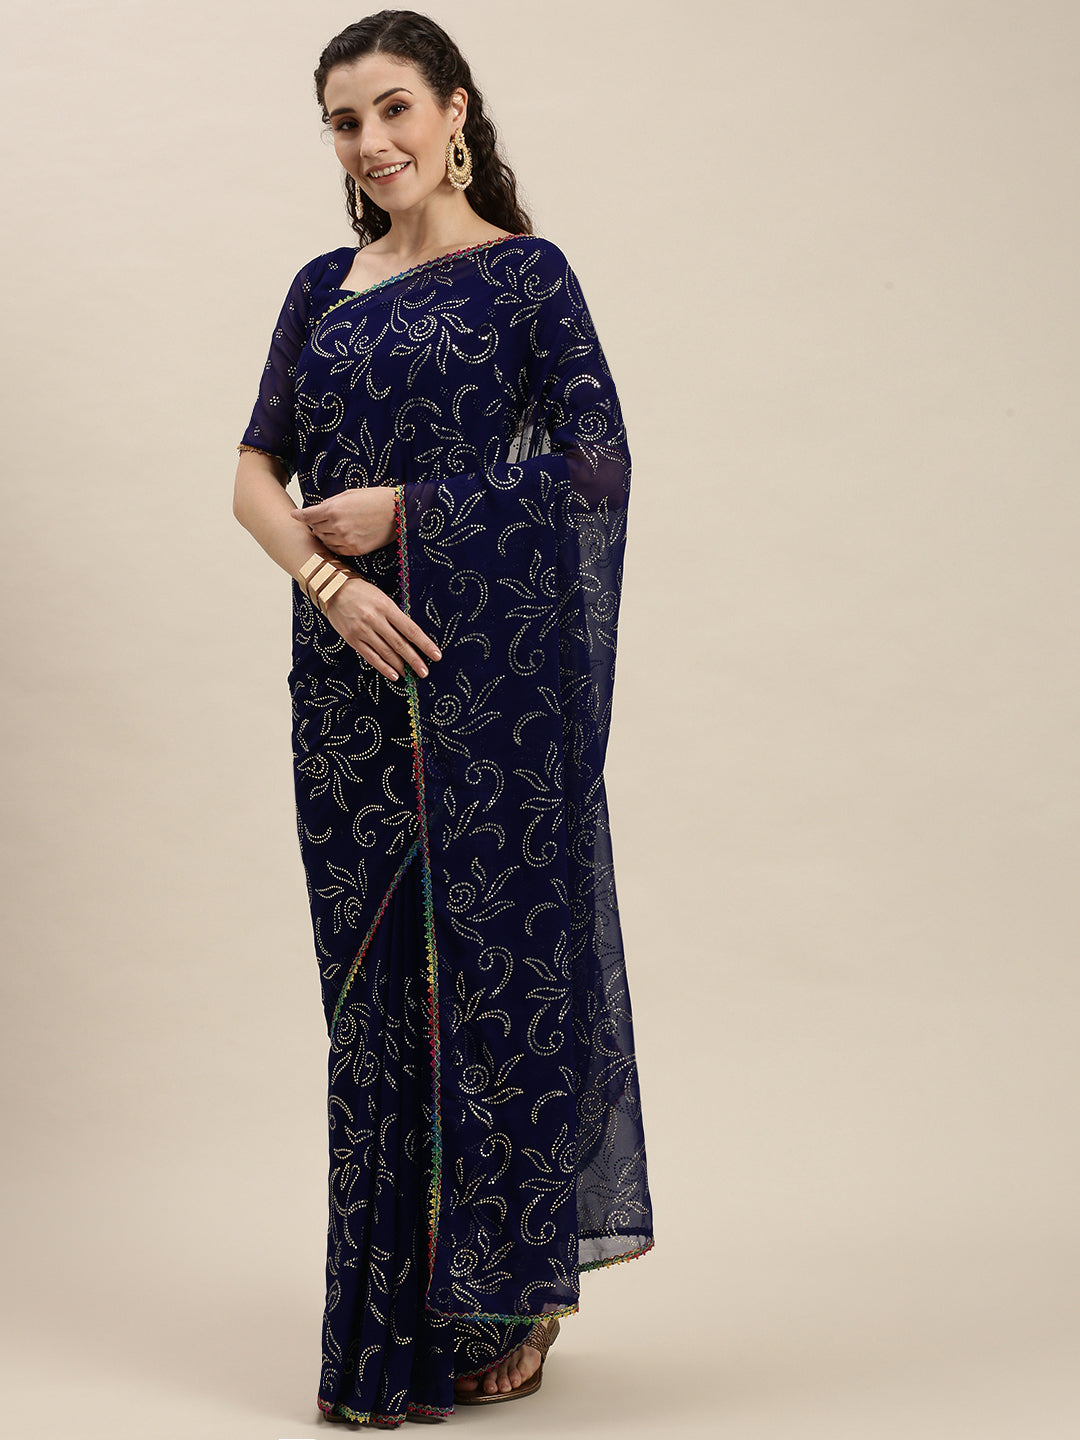 Amazing Blue Beads and Stones Embroidered Saree